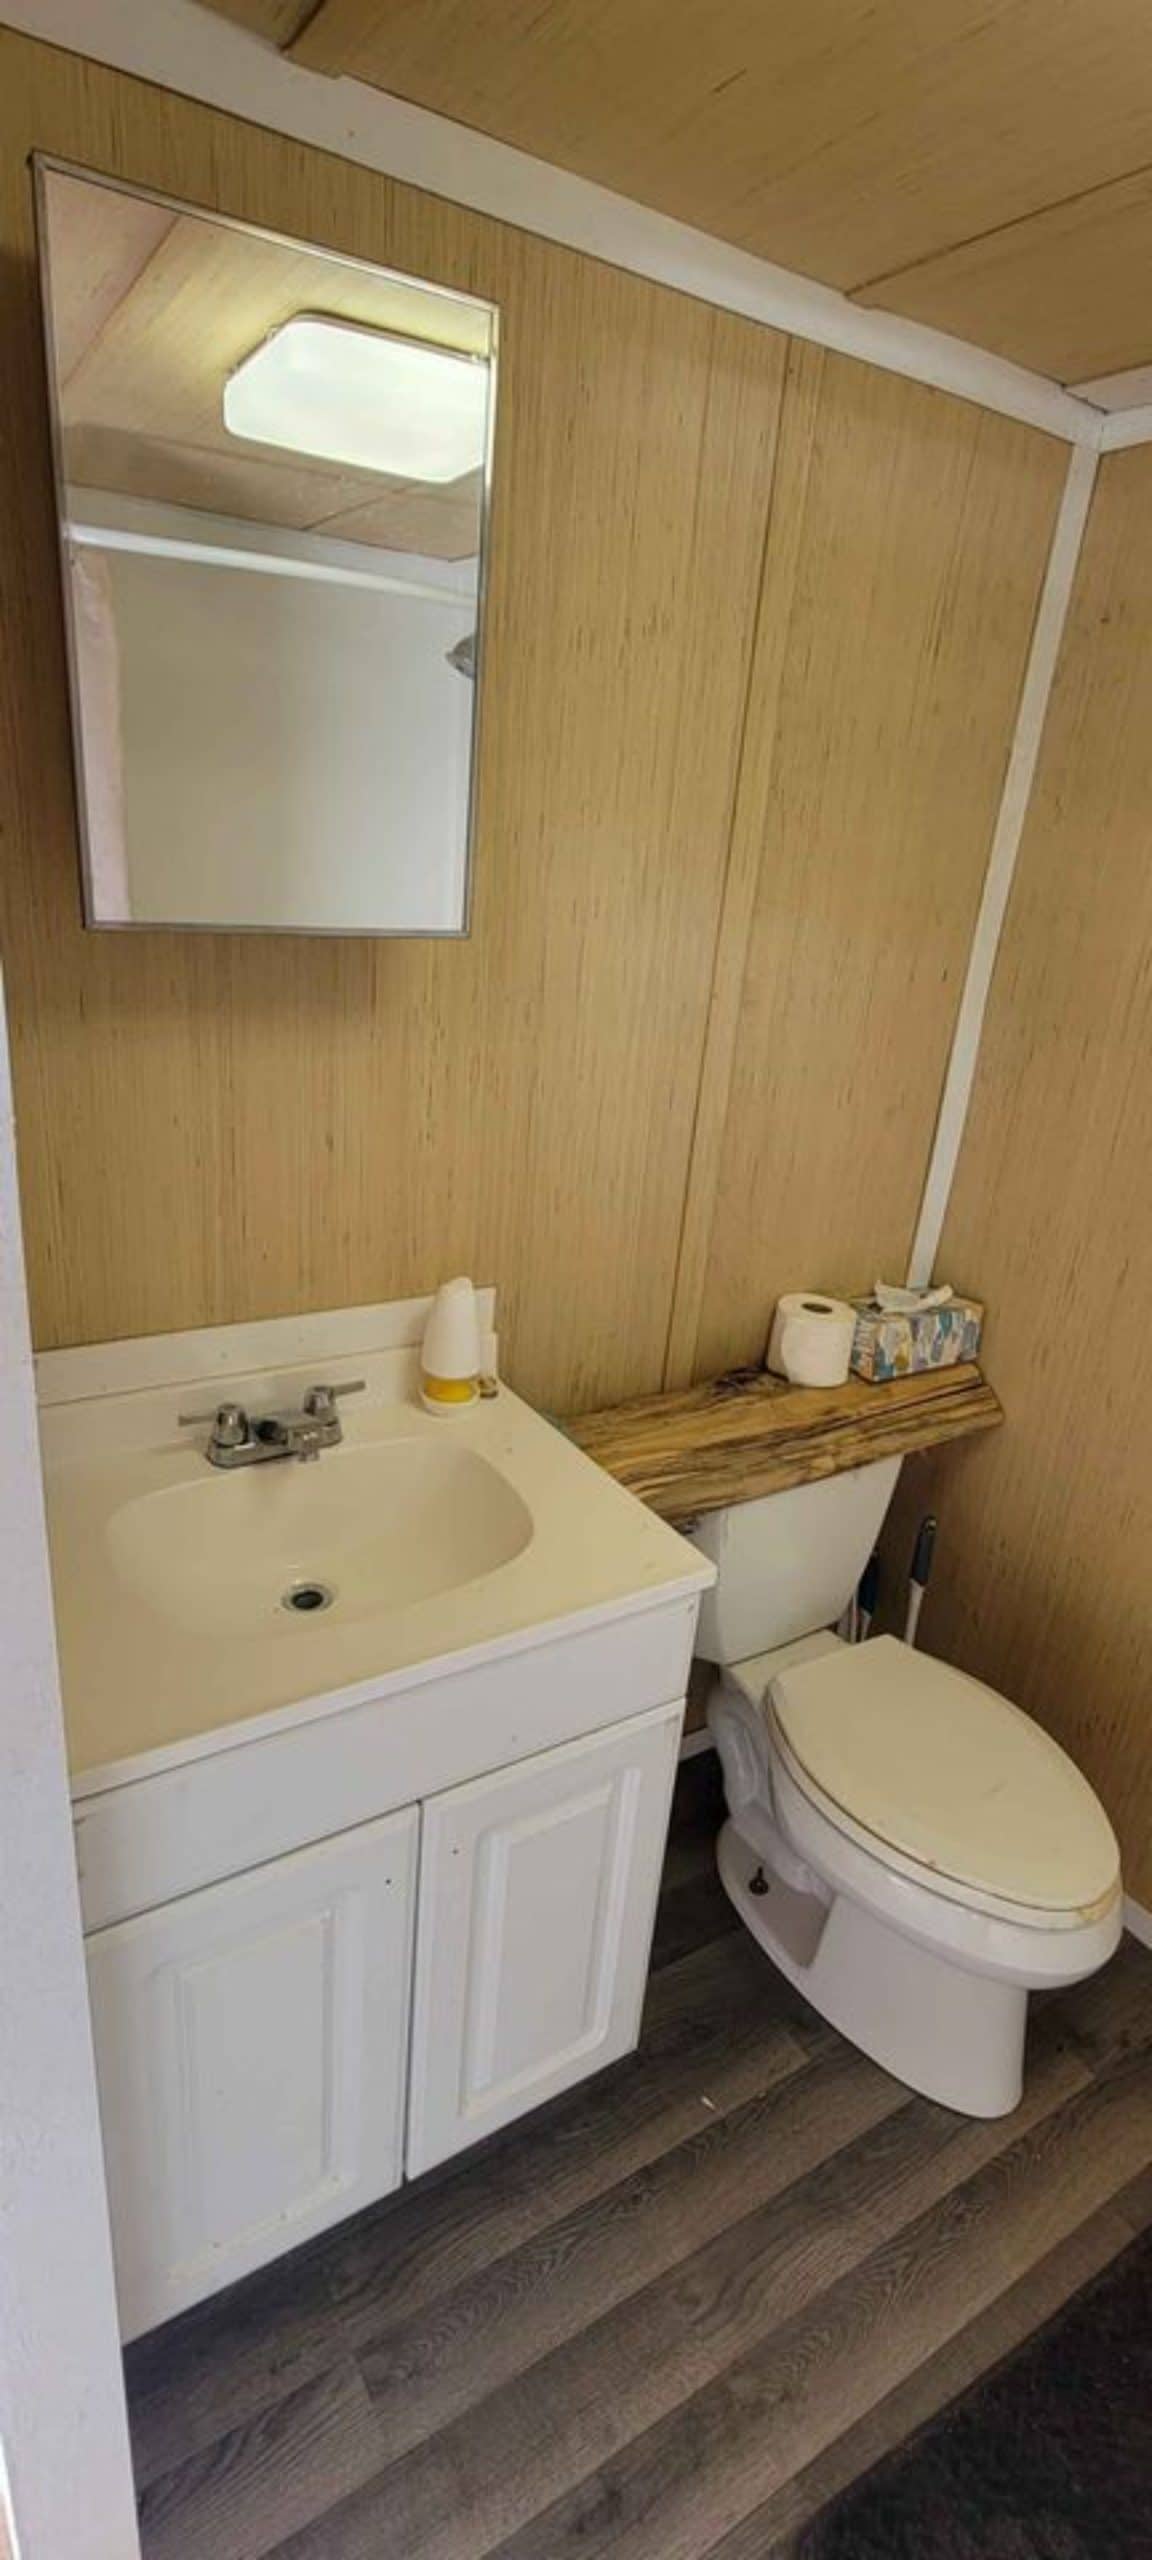 Standard toilet, sink with vanity and mirror is installed in bathroom of 28' Budget Friendly Tiny House